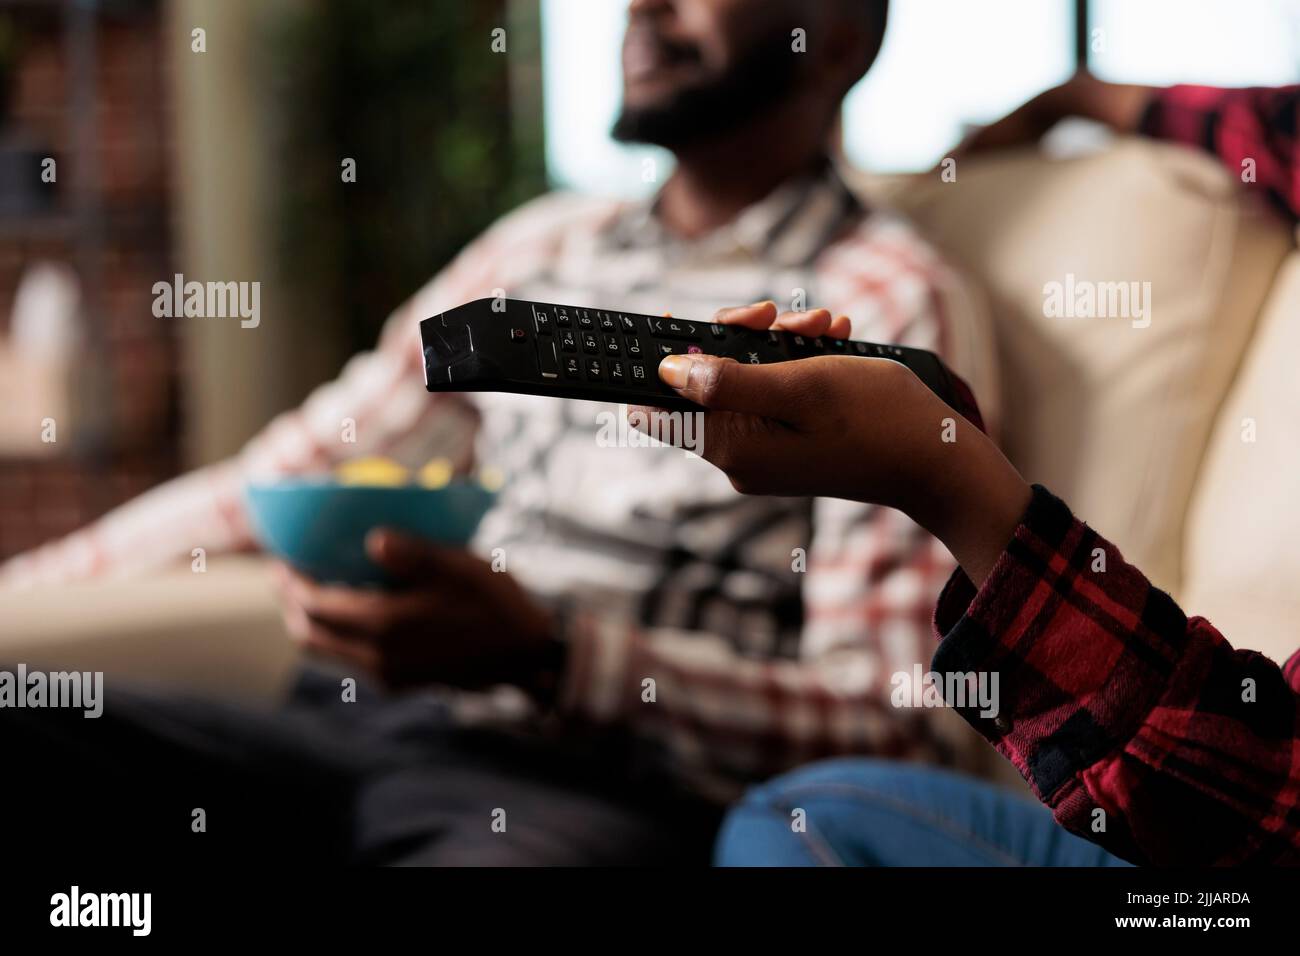 Young woman using tv remote control to switch channel program and find movie on television to watch. Eating takeaway delivery from fast food and watching film together. Close up. Stock Photo